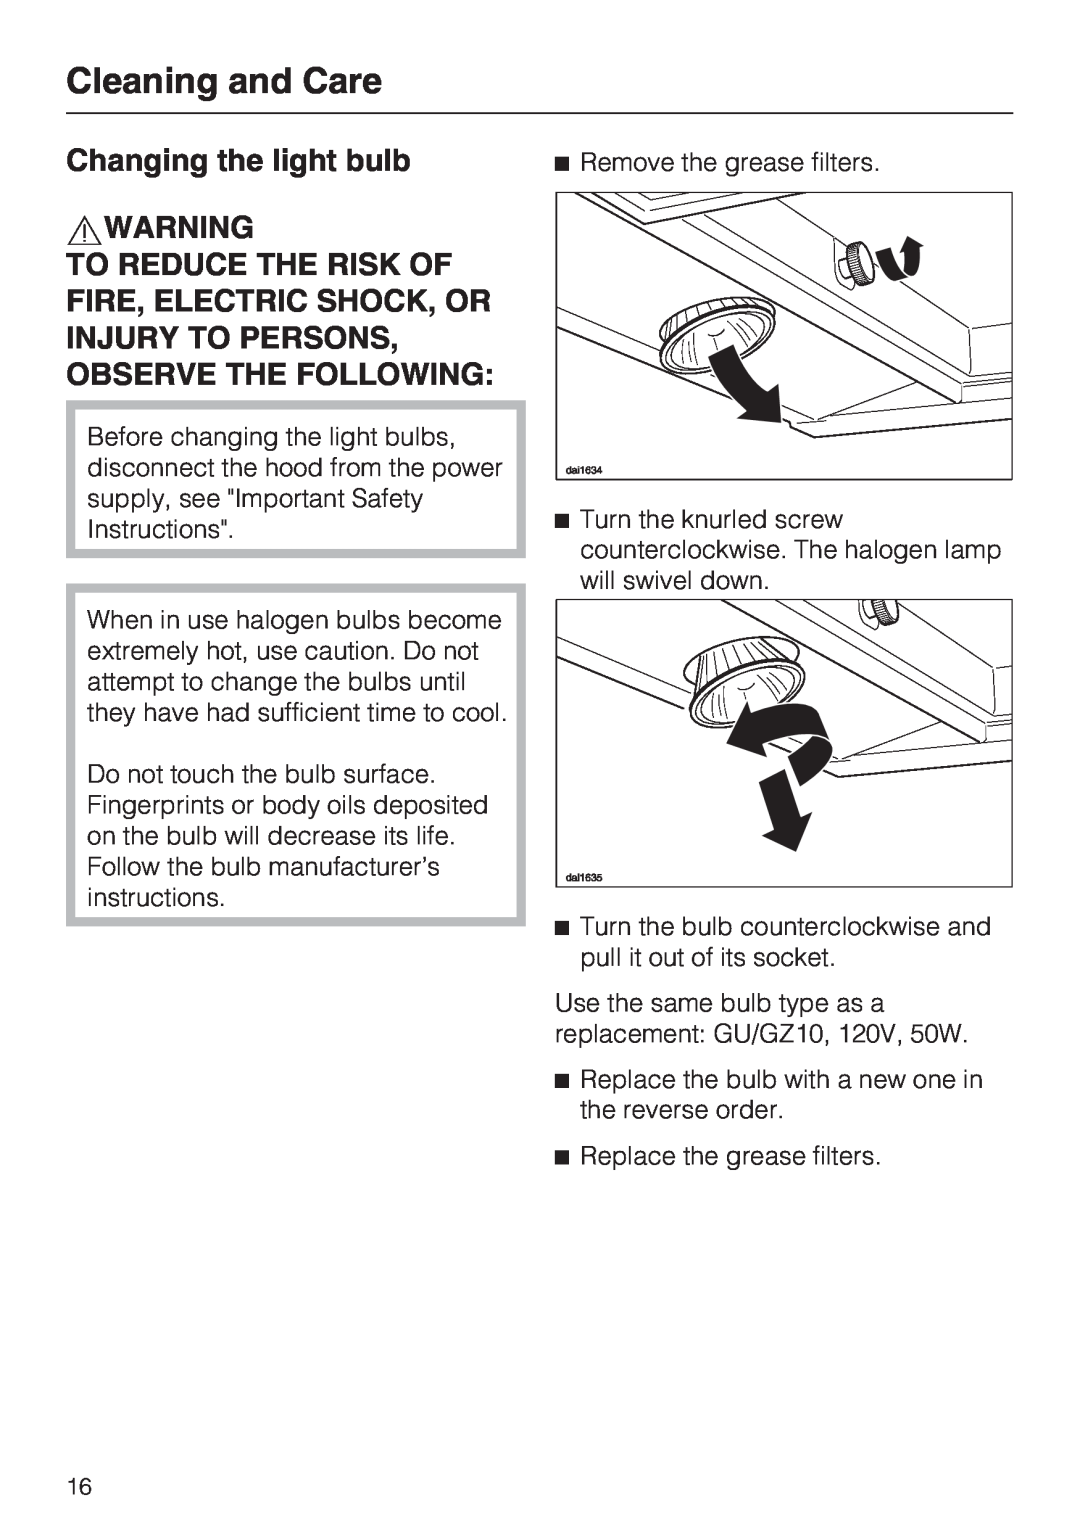 Miele DA 399-5, DA 398-5 installation instructions Changing the light bulb, Cleaning and Care 